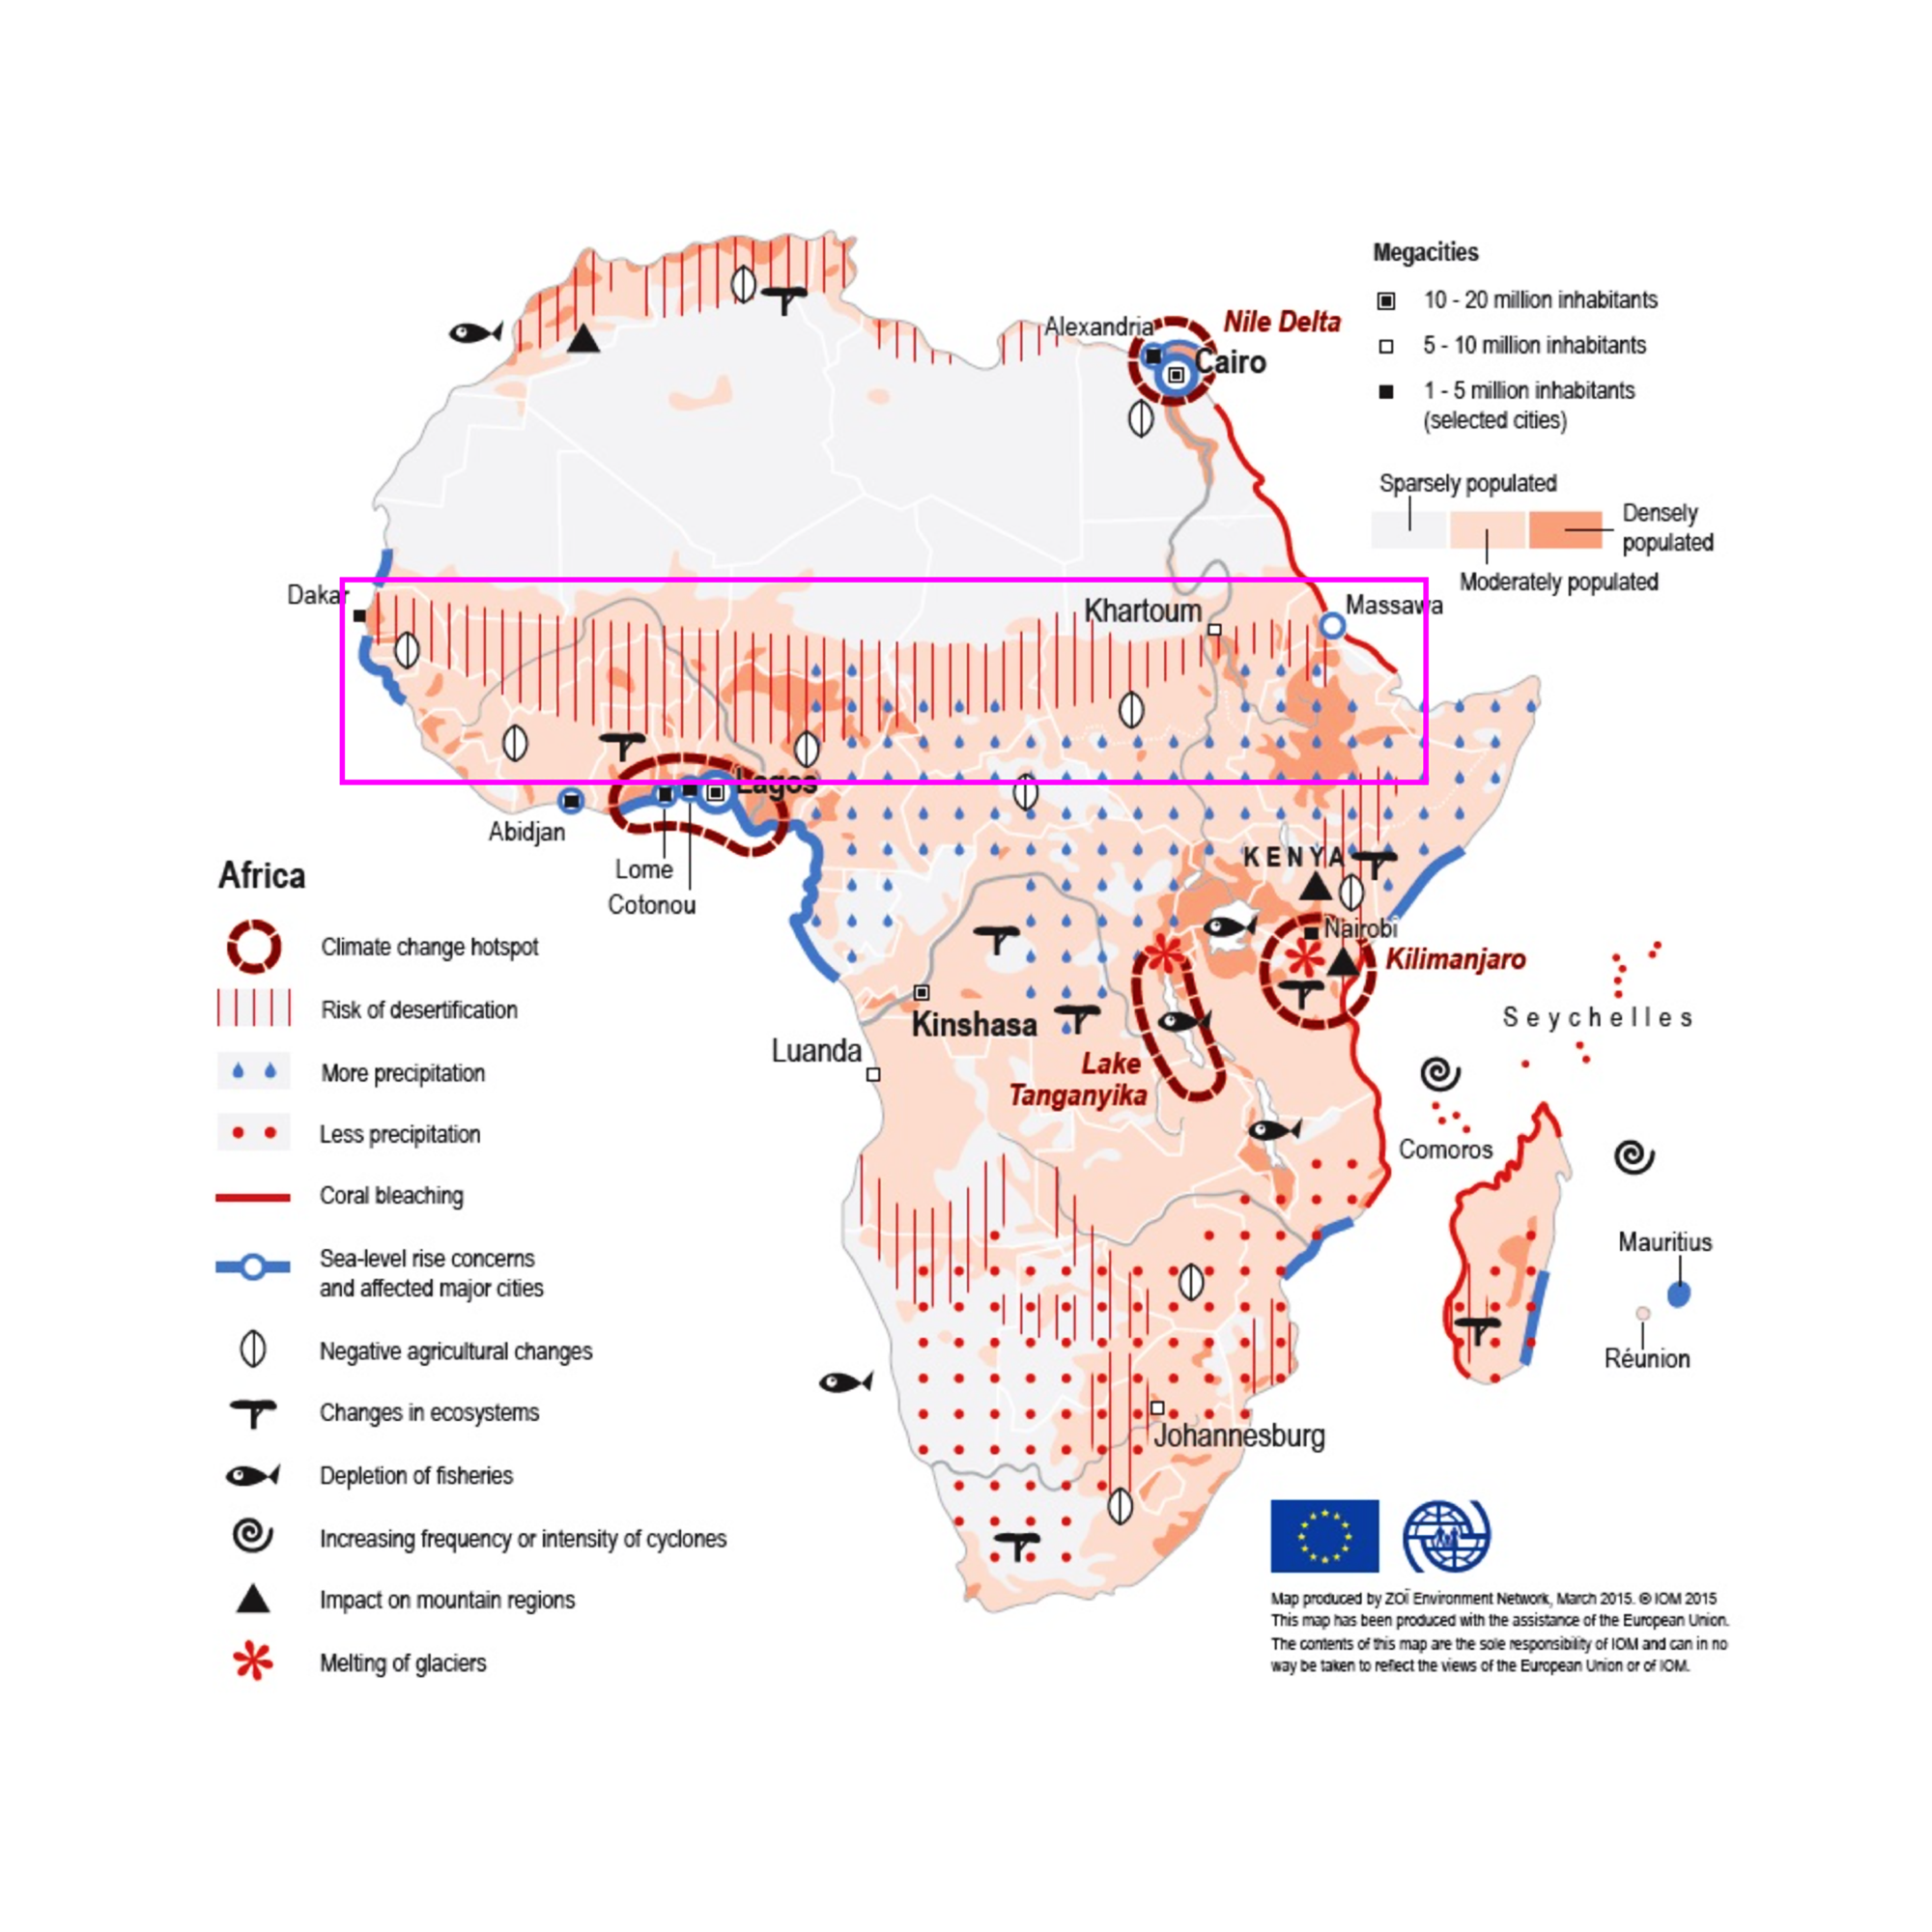 Environmental impacts in Africa